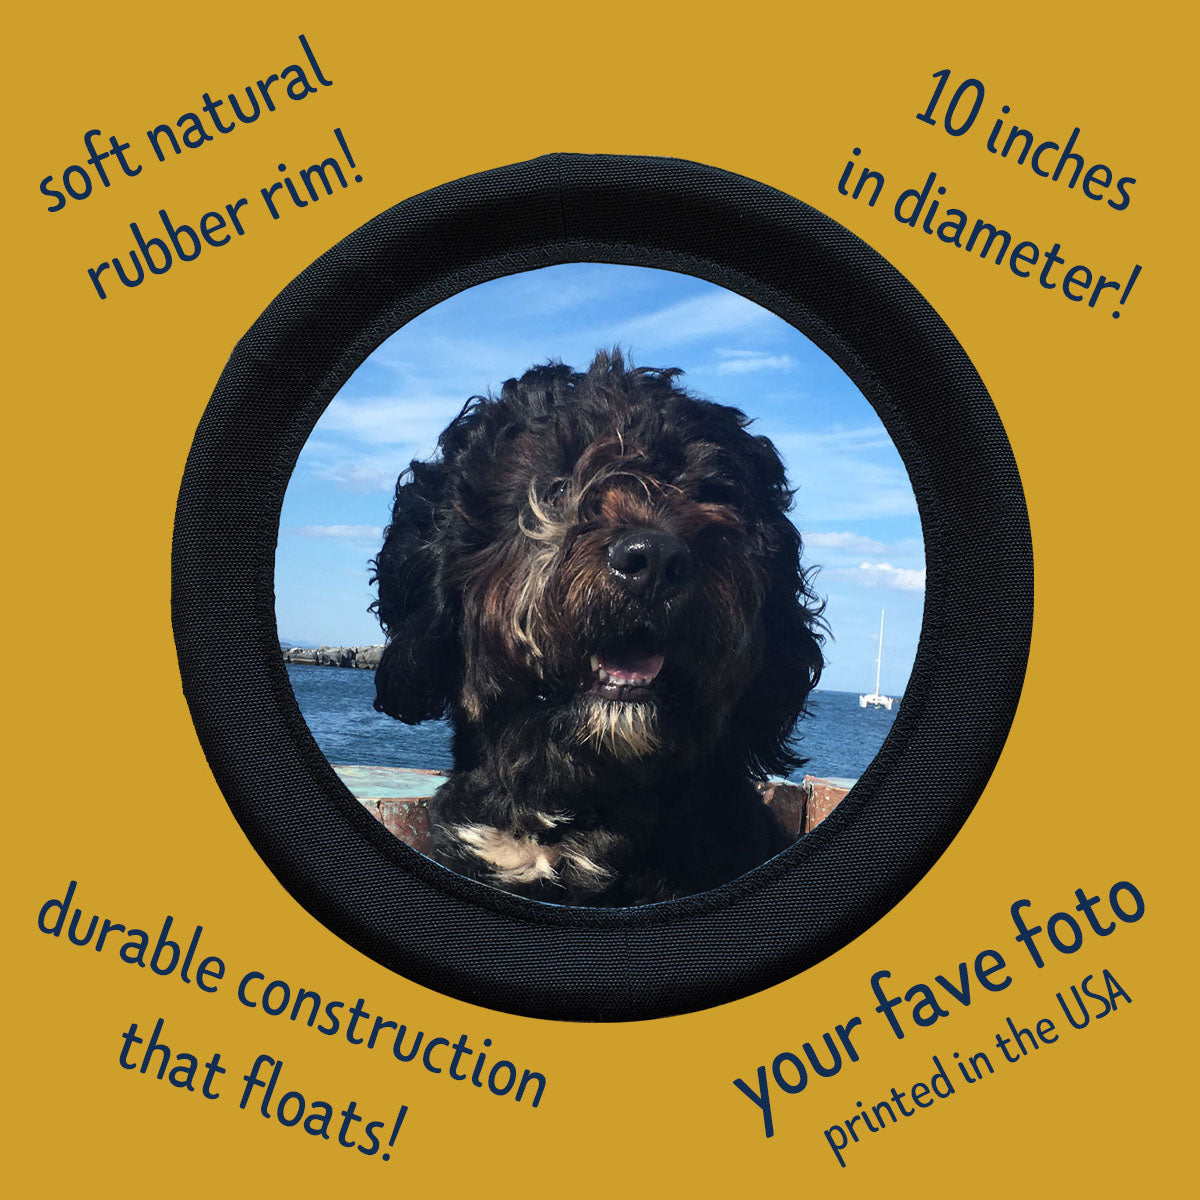 Features of the custom FotoFrisby Flying Disk Dog Toy - Soft rubber rim, durable construction and it floats!